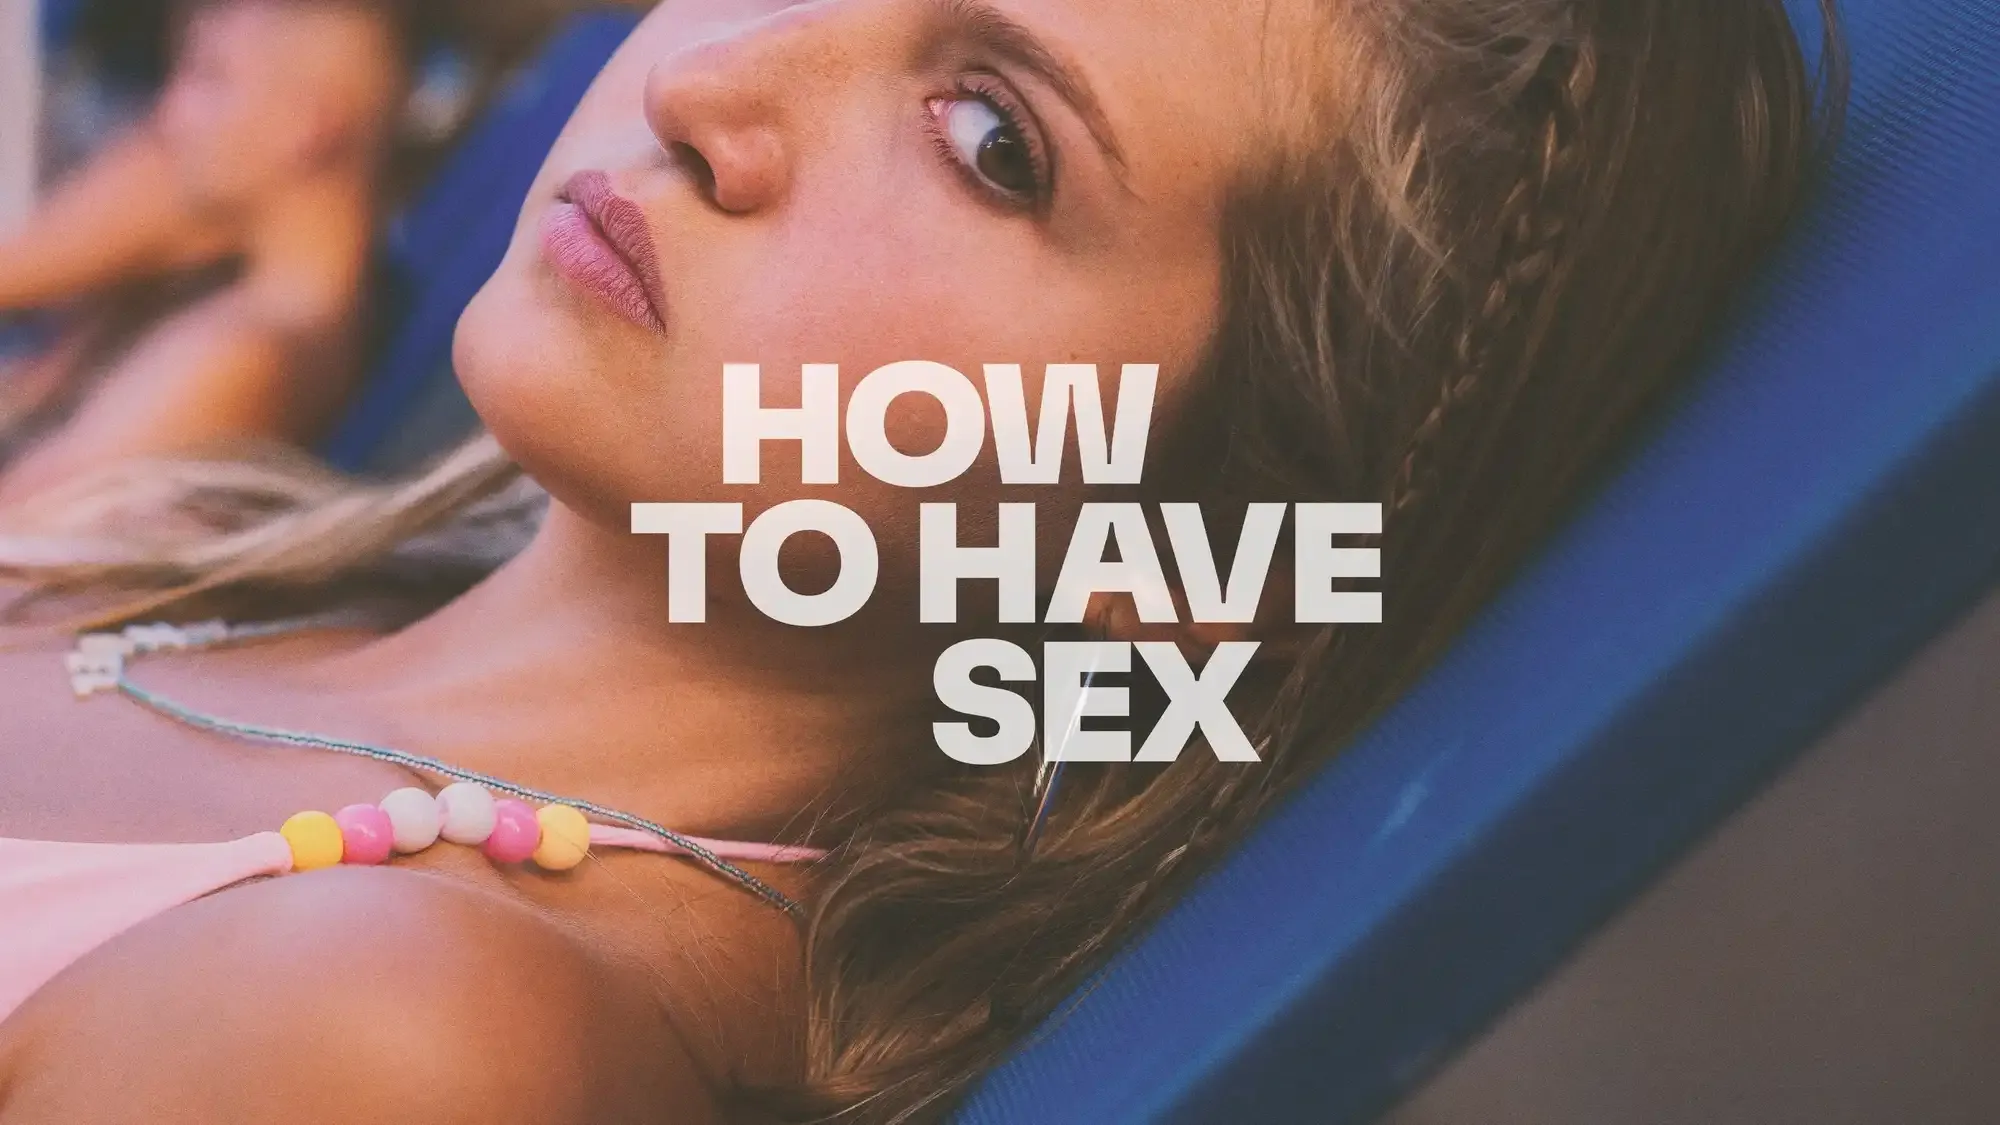 How to Have Sex movie review